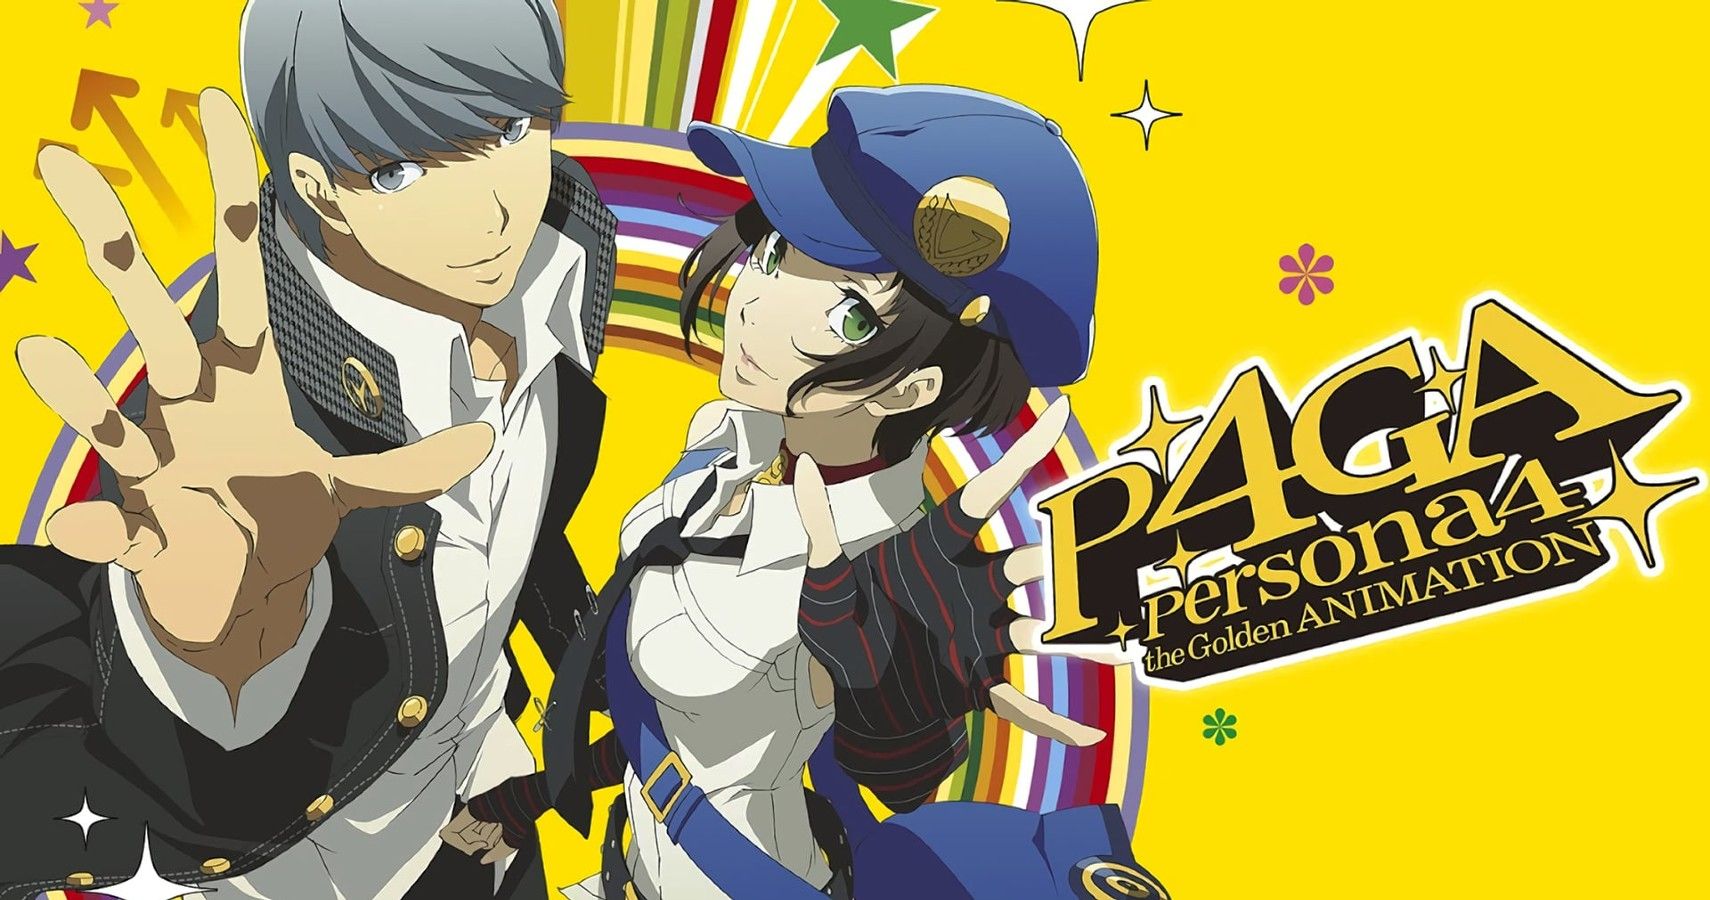 Characters from Persona 4